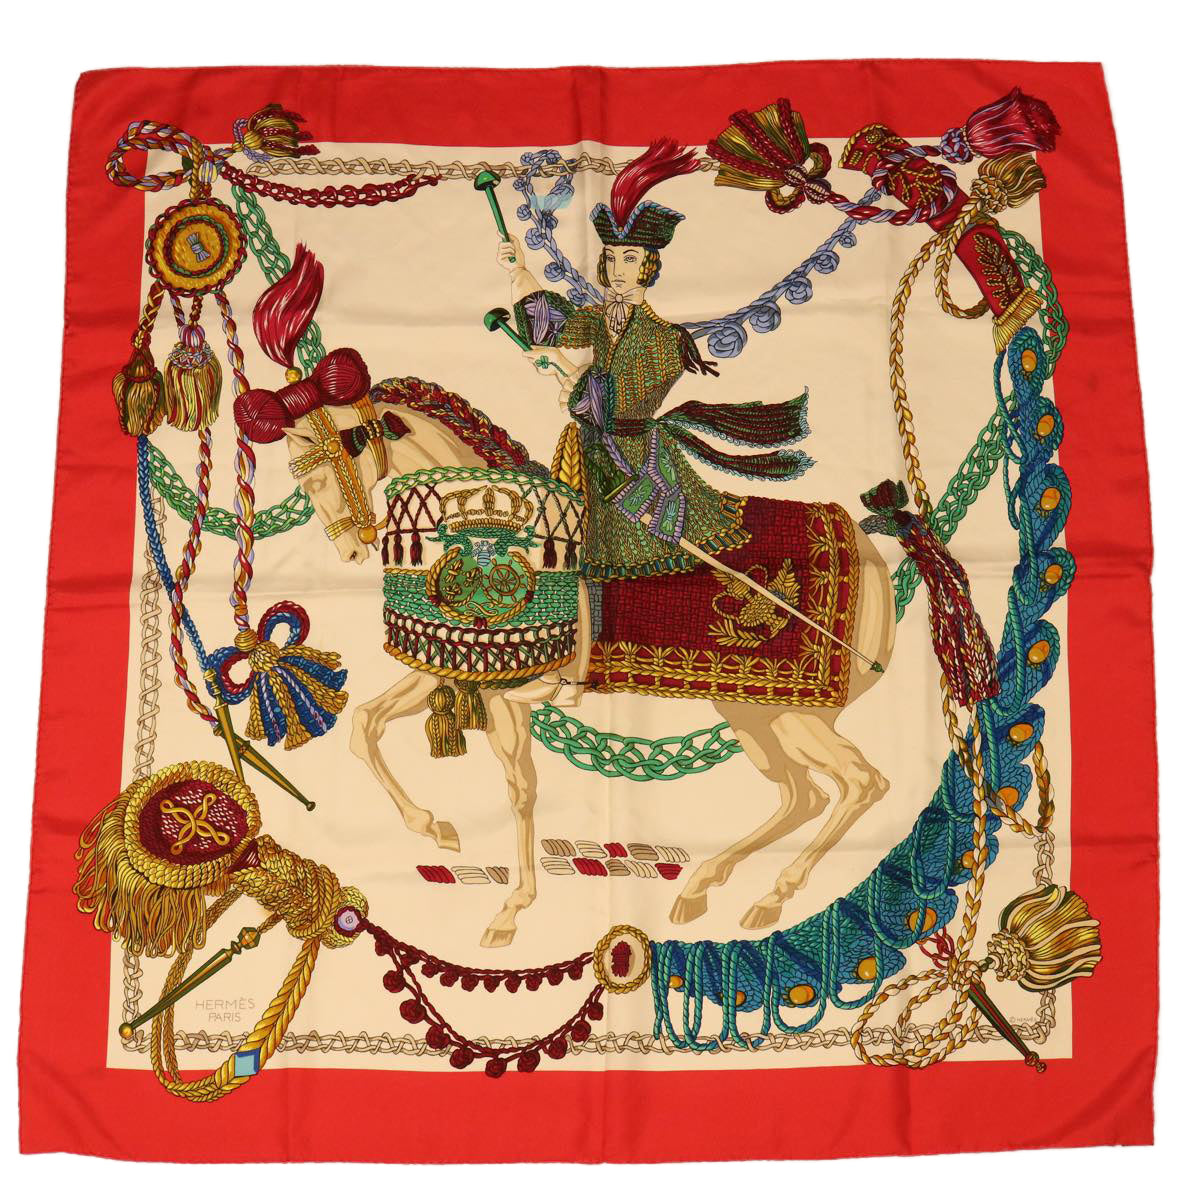 HERMES Carre 90 Scarf ”Le Timalier” Silk Red Auth bs7268 - 0